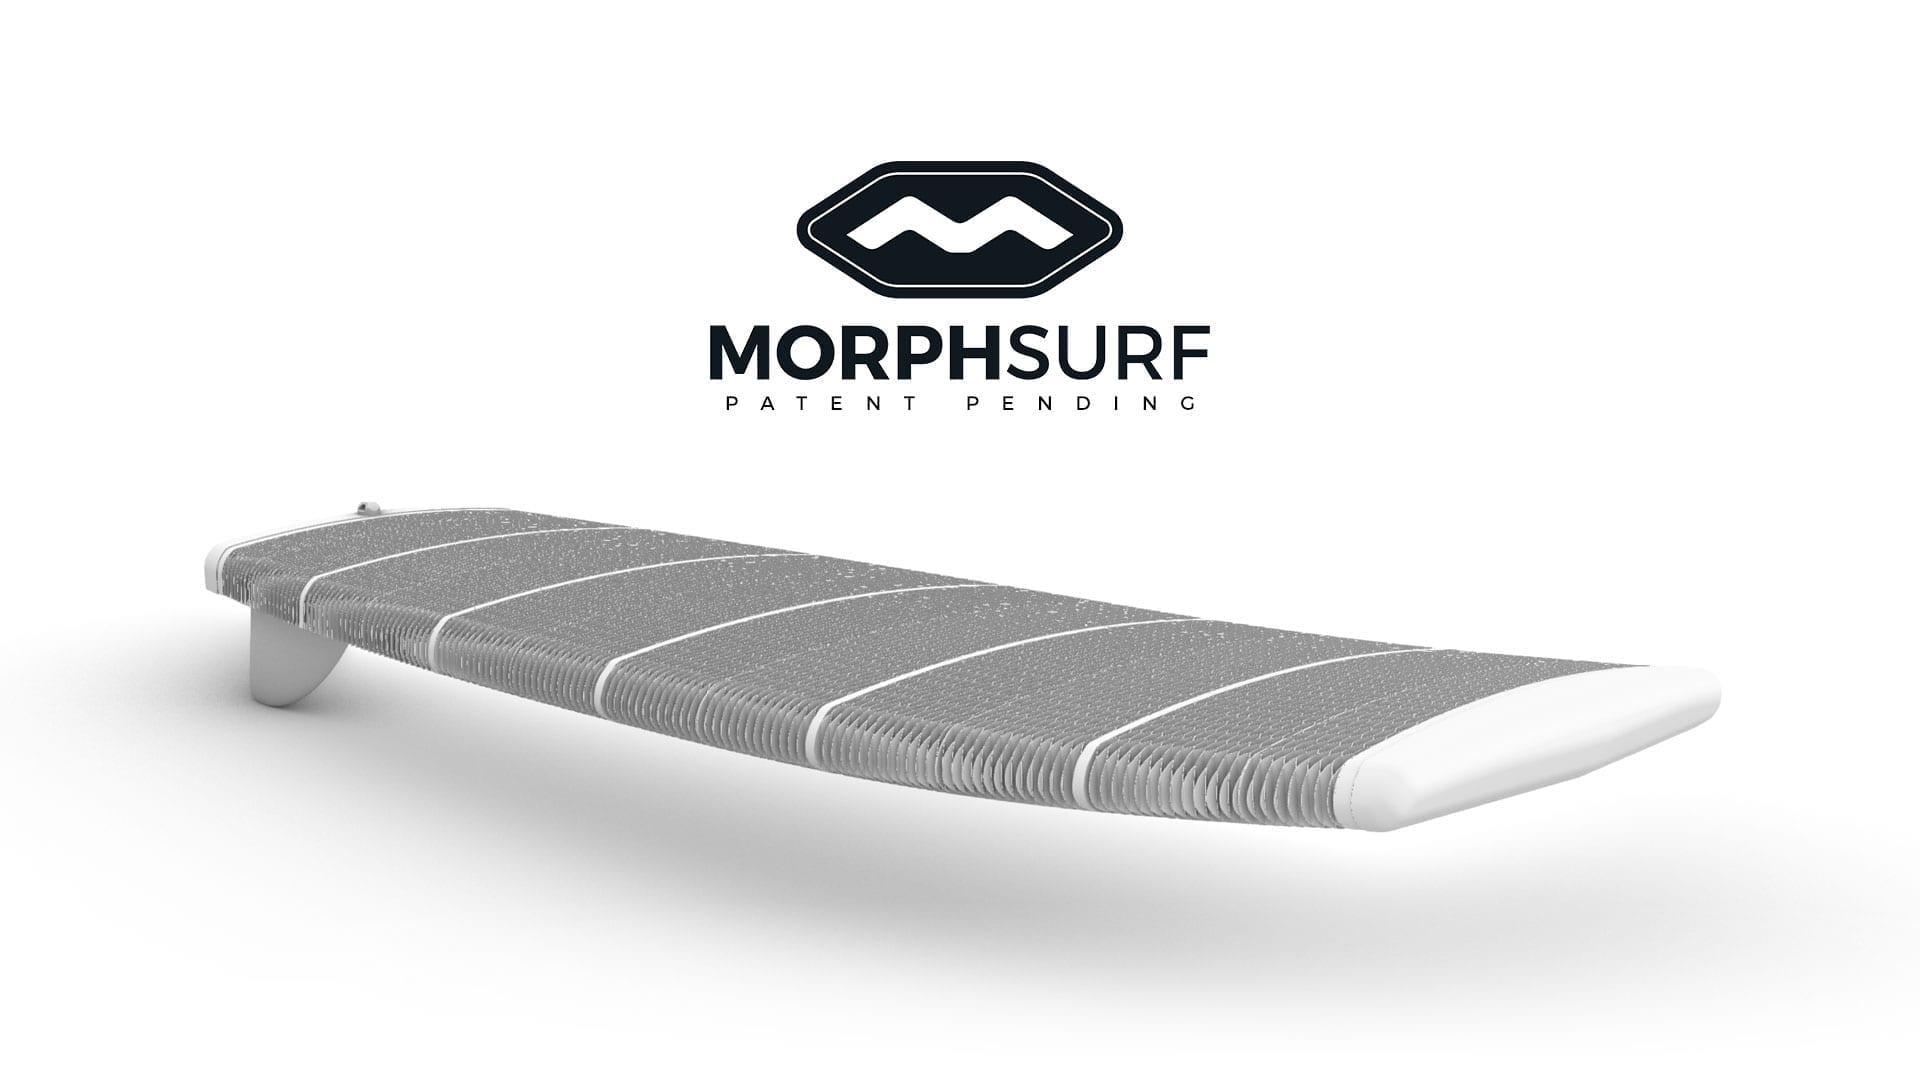 MorphSurf Collapsible Surfboard Patent Pending